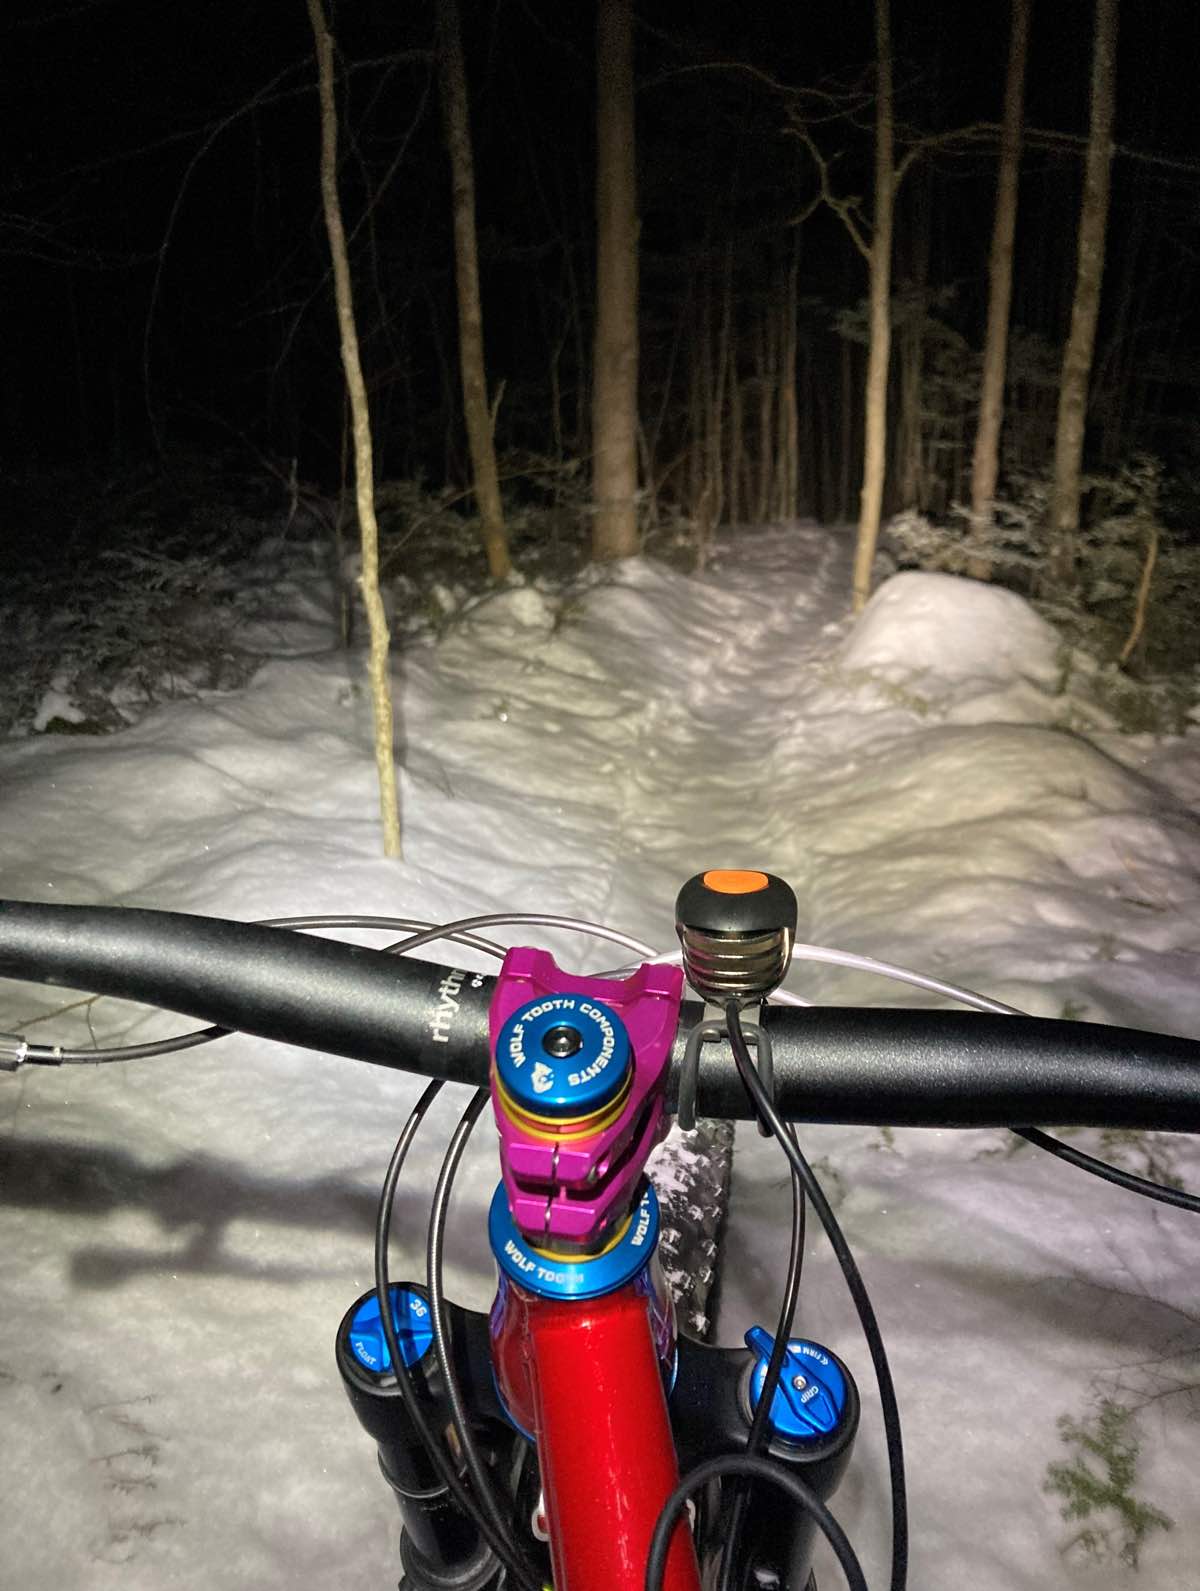 bikerumor pic of the day a view of a snow covered trail at night with the woods surrounding in darkness as a light shines on the trail over the handlebar and colorful cockpit of a mountain bike.